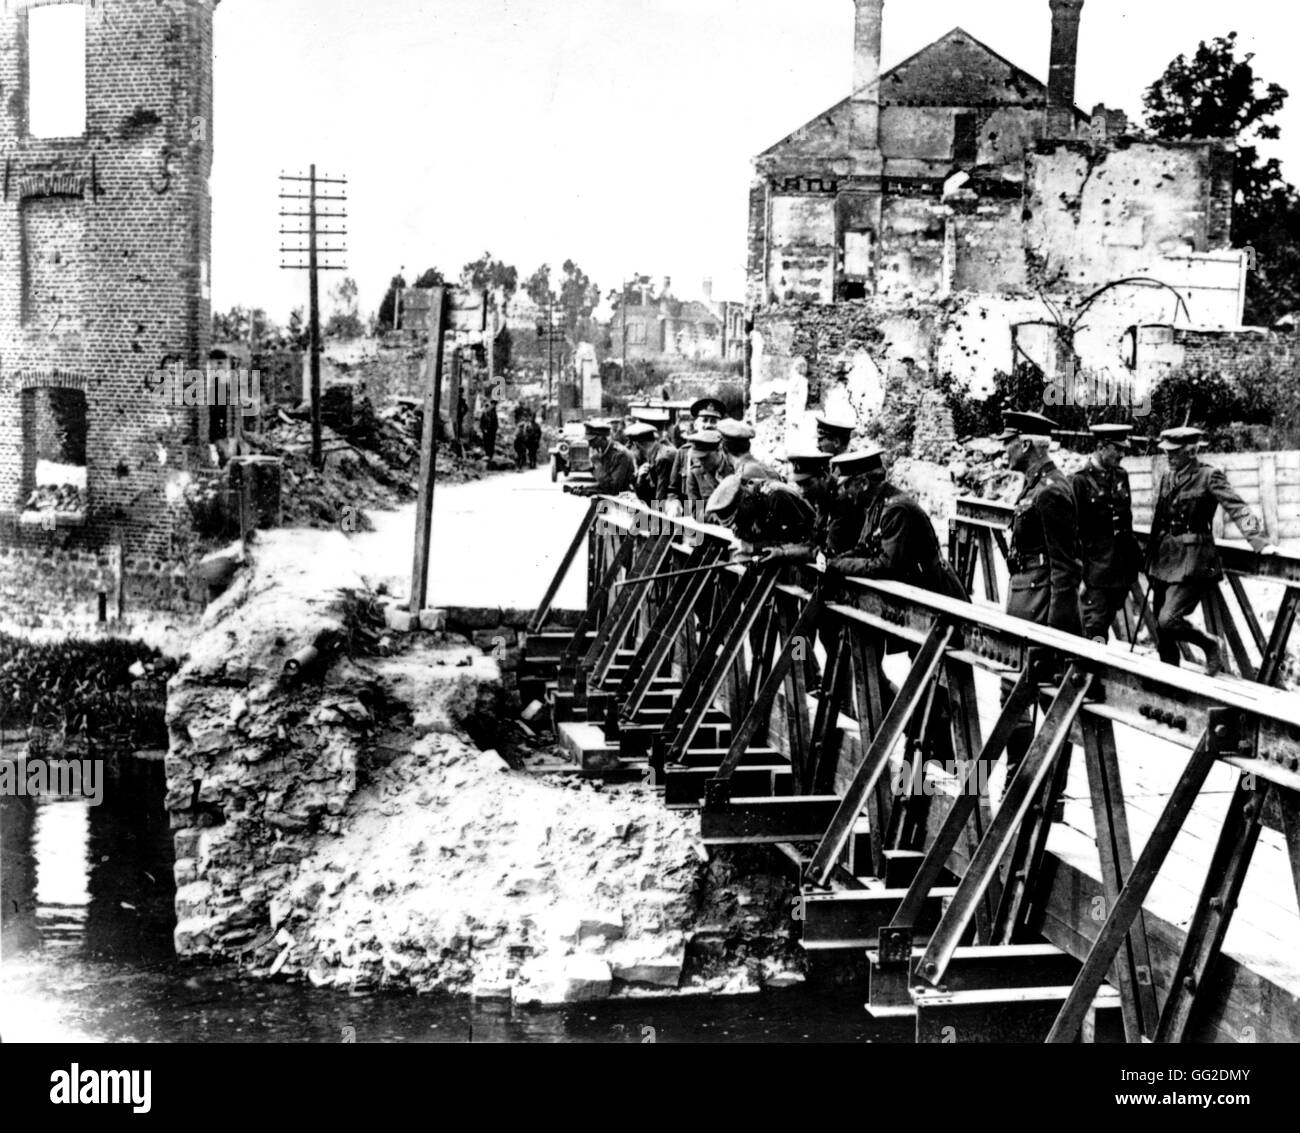 The King of England, George V, and the Prince of Wales on the remaining part of the Peronne bridge (Somme) 1917 France - World War I Stock Photo